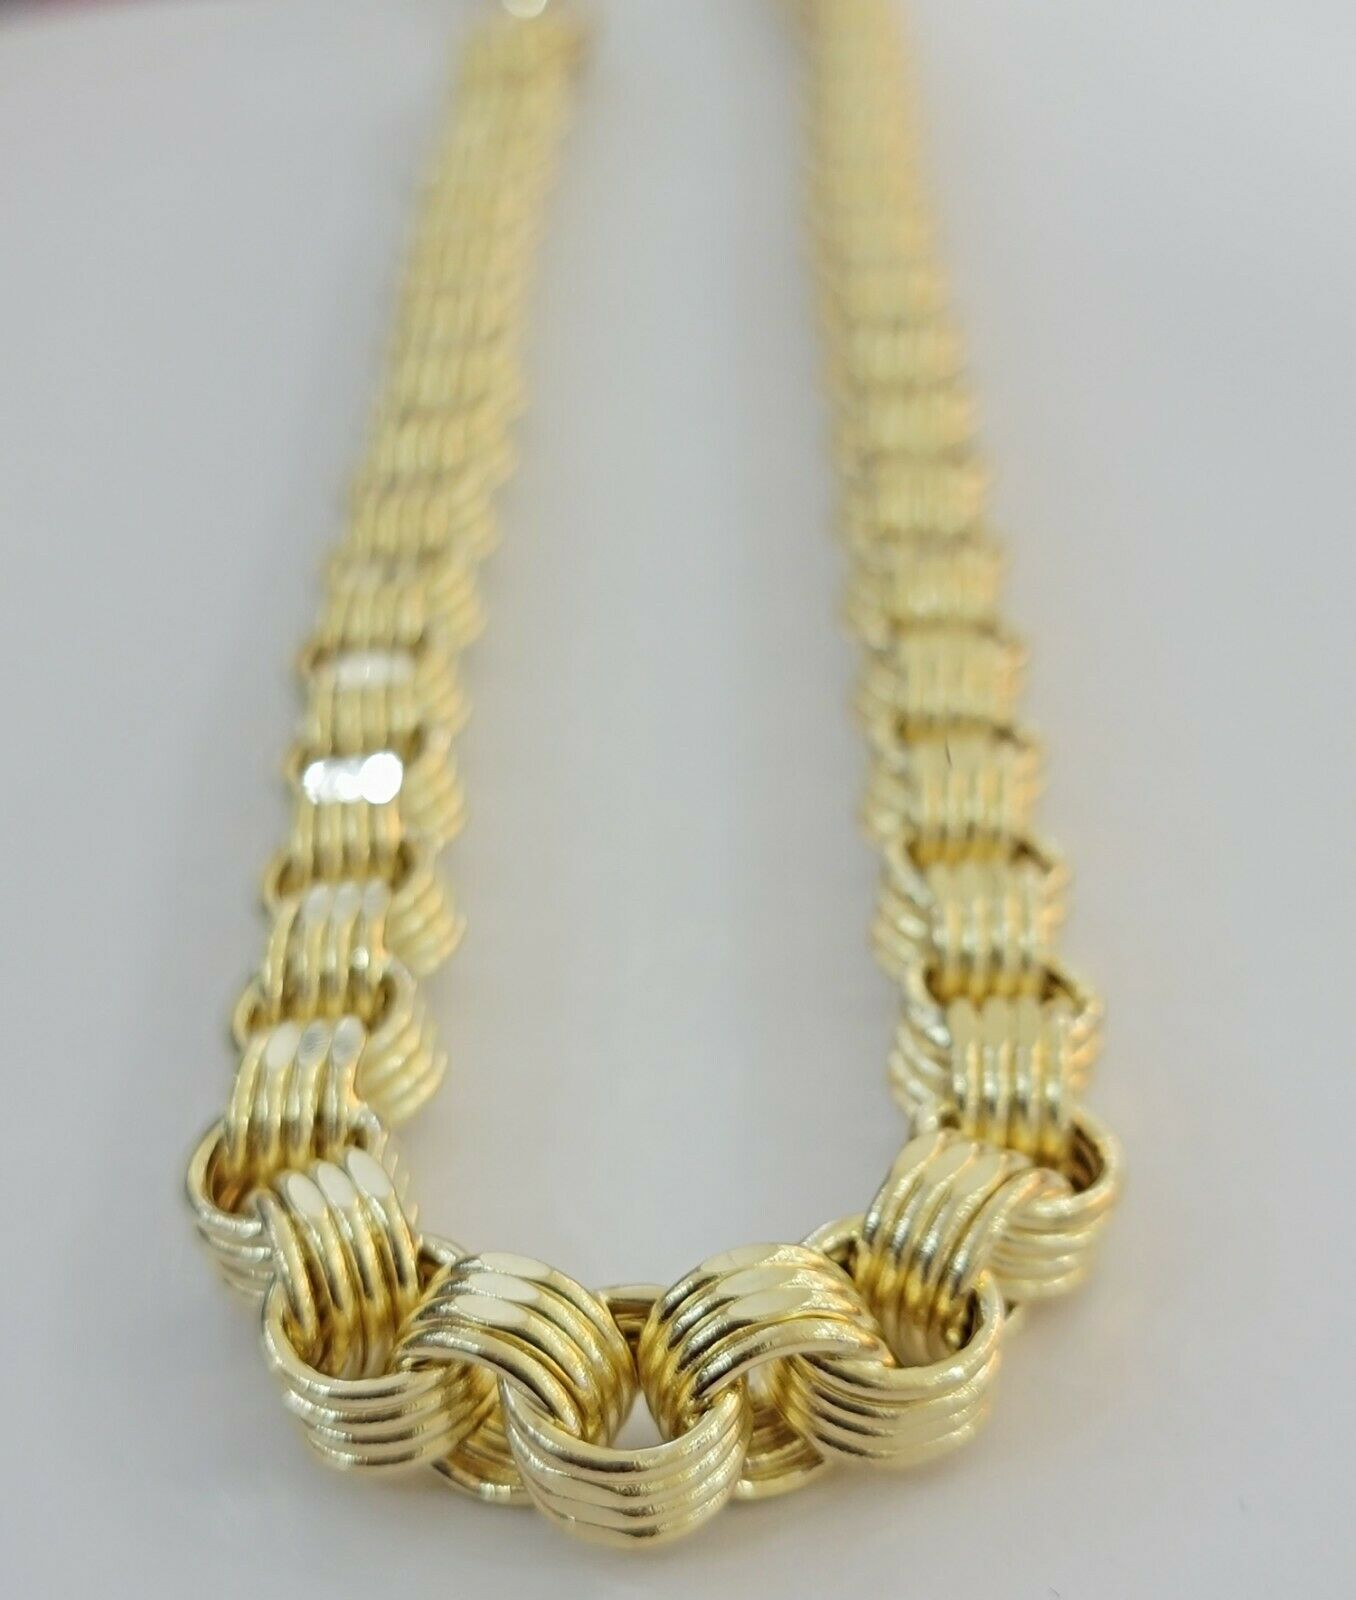 Real 10k Gold Byzantine Chain Necklace 8mm 30" Long 10kt Yellow Gold,Thick shiny